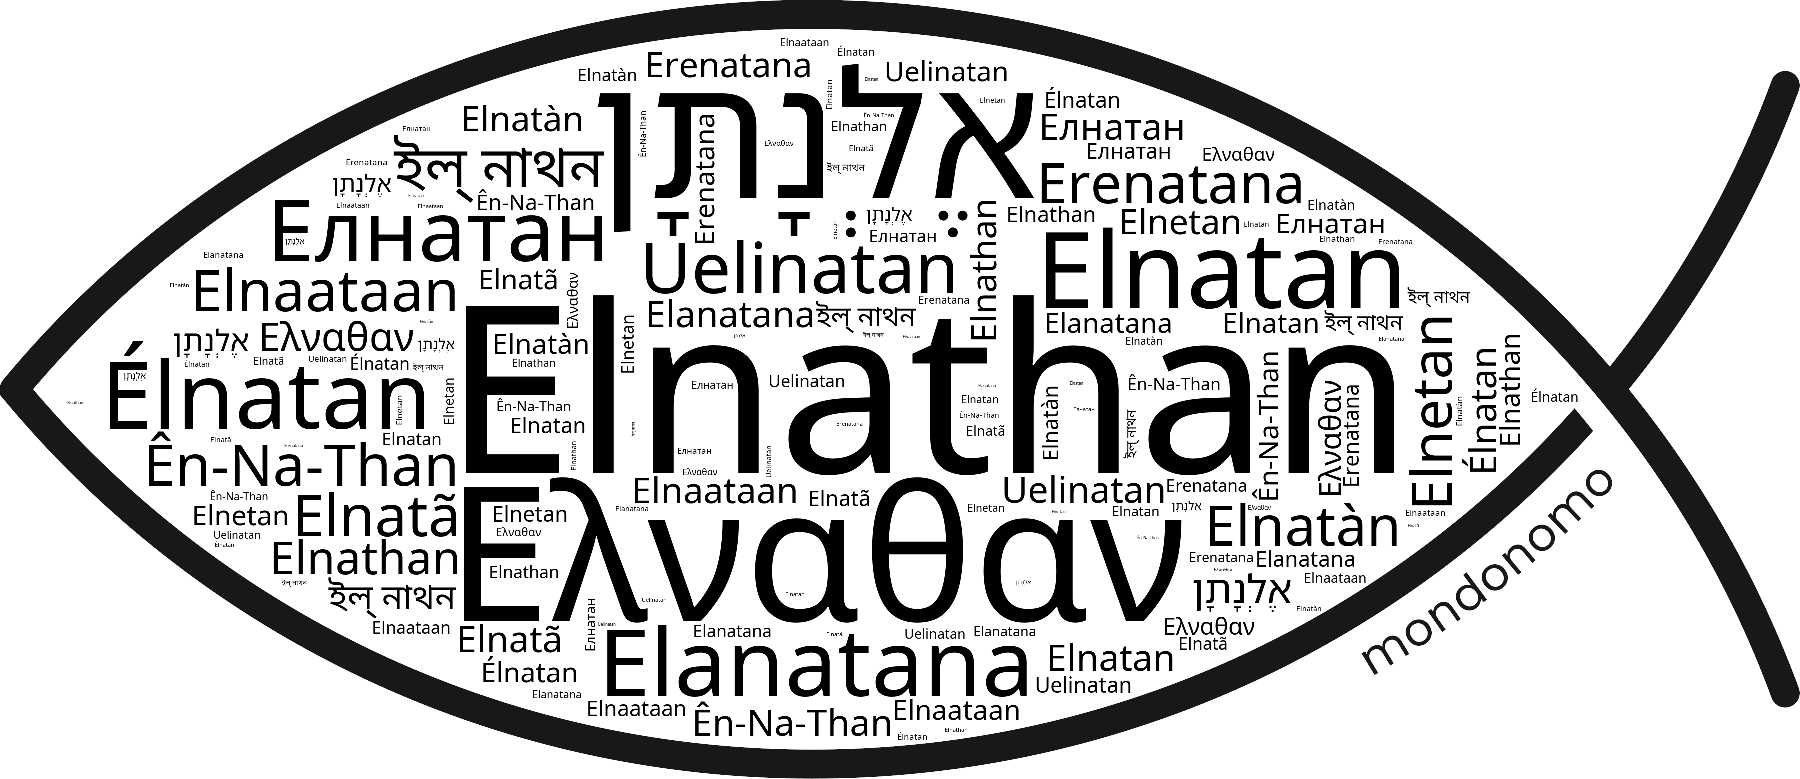 Name Elnathan in the world's Bibles